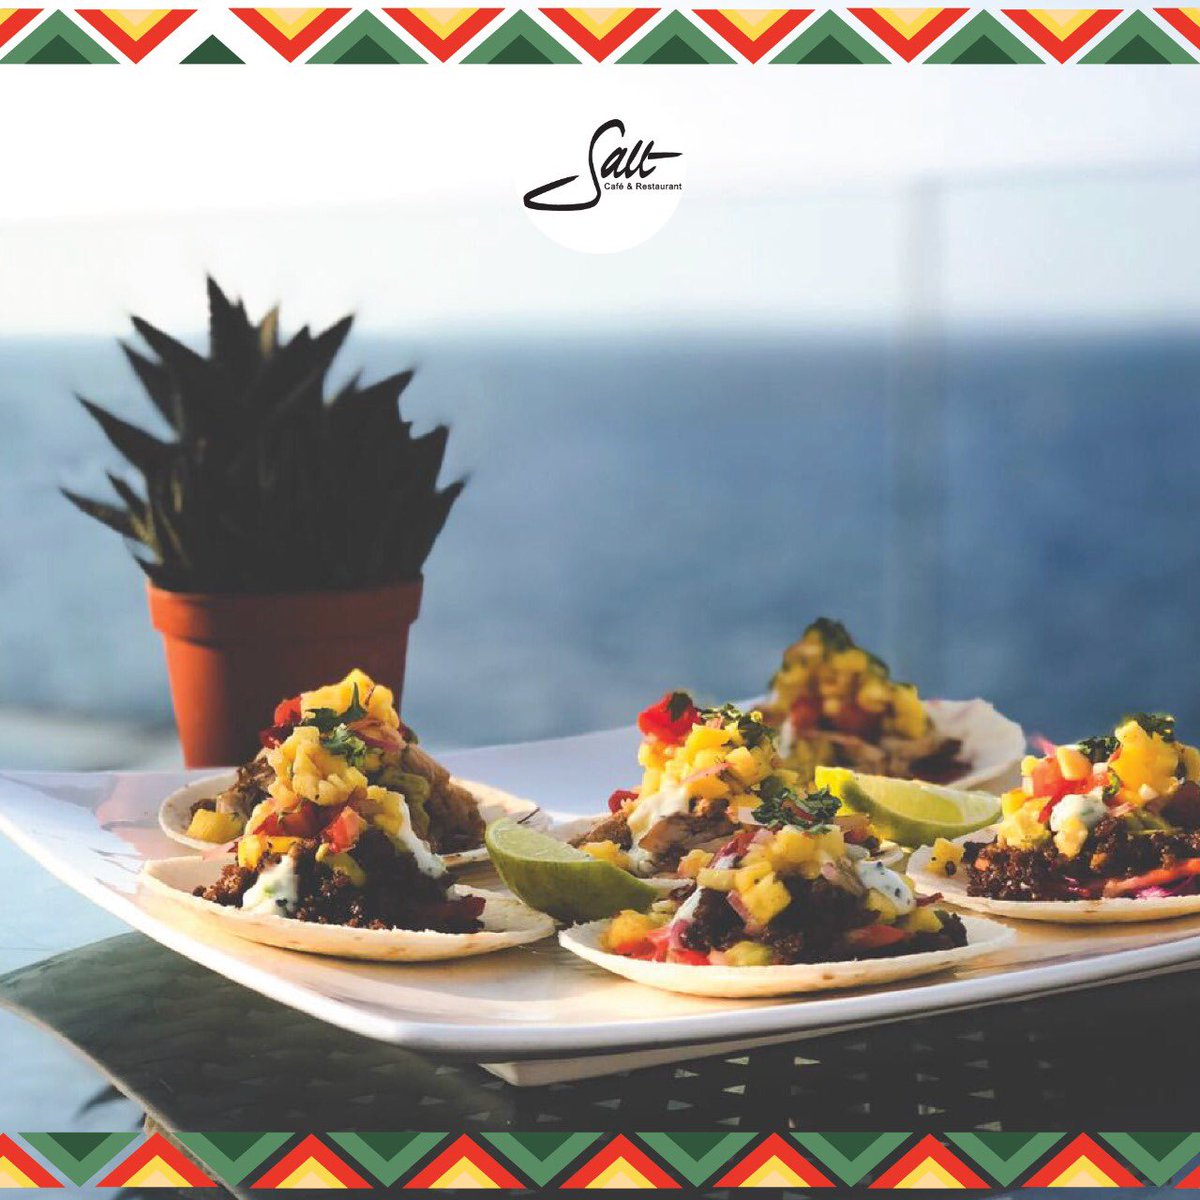 Let’s taco ‘bout how awesome Let’s Mex Is @saltcnr #saltletsmexit #letsmexit #malecity #instagram #foodfiesta #yummy